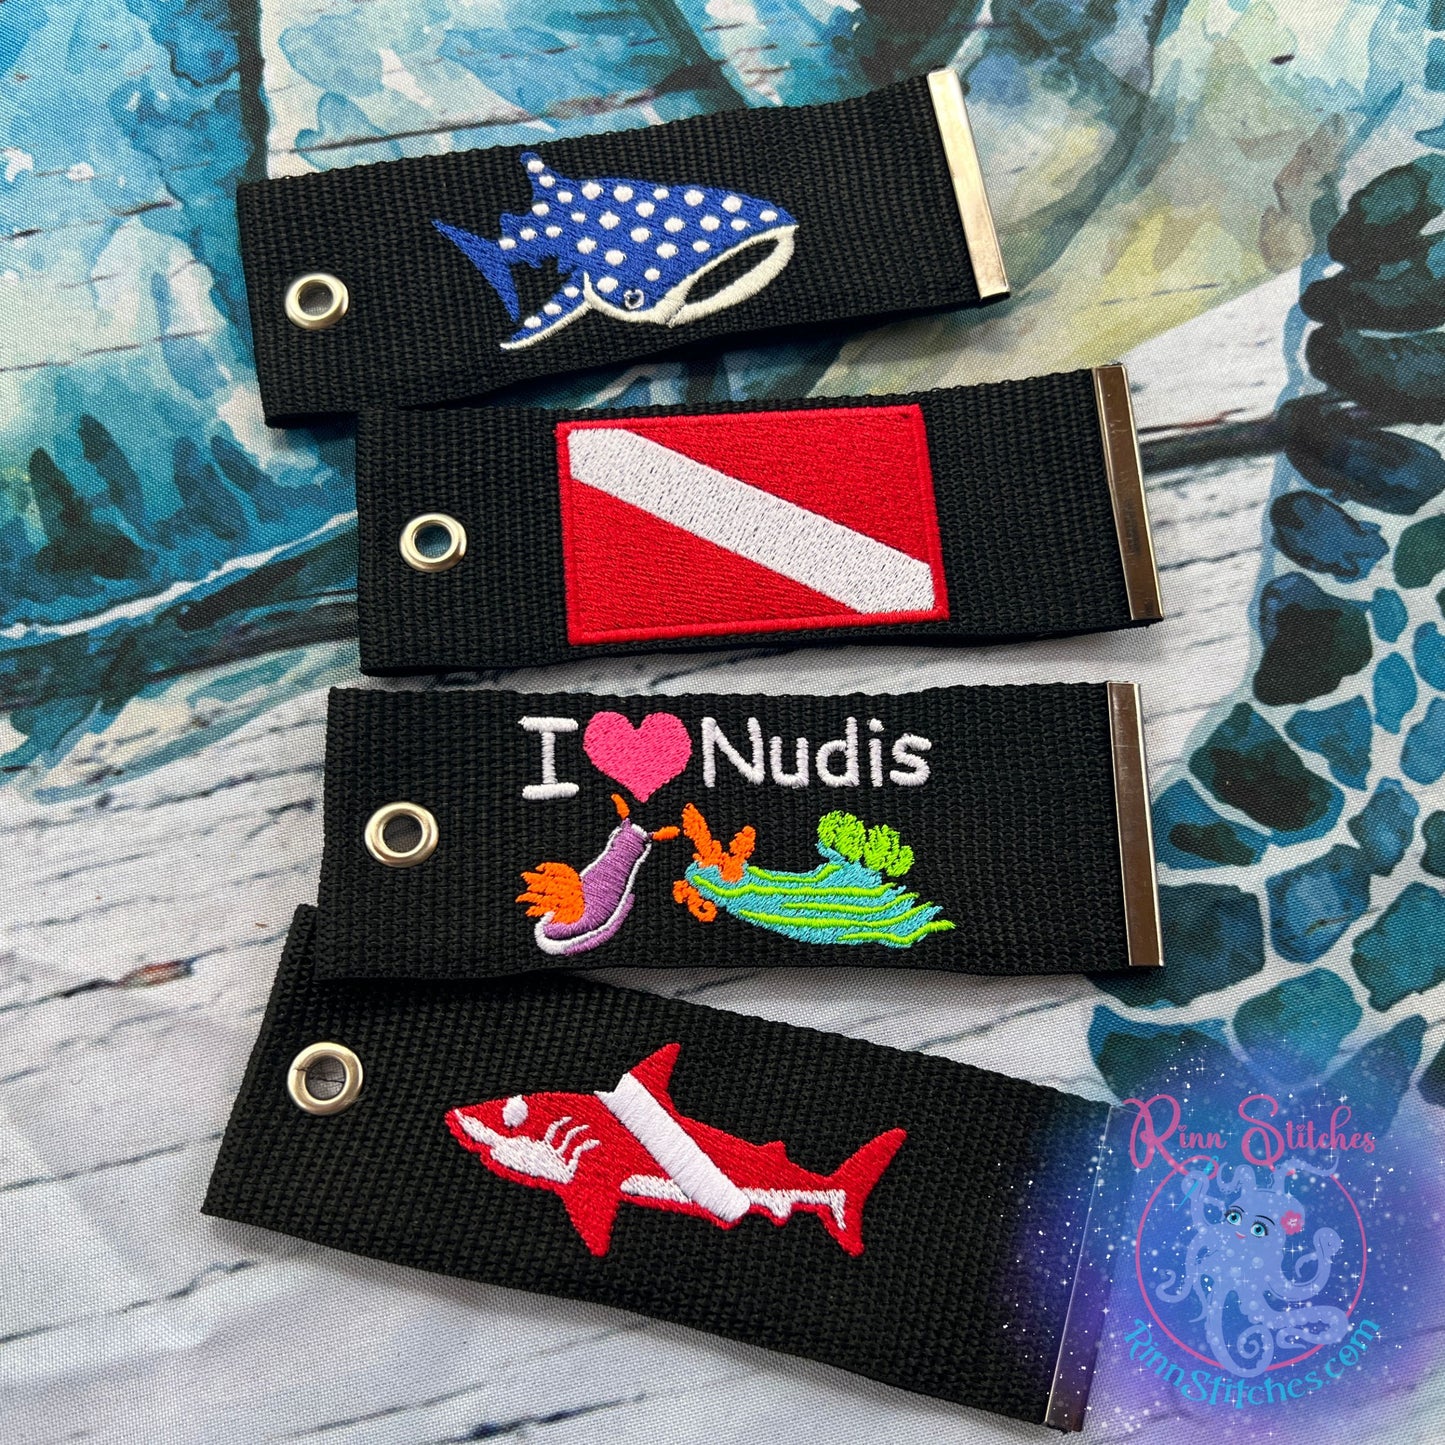 Sheep Nudibranch Luggage Tag, Personalized Embroidered Bag Tag for all your Travel needs